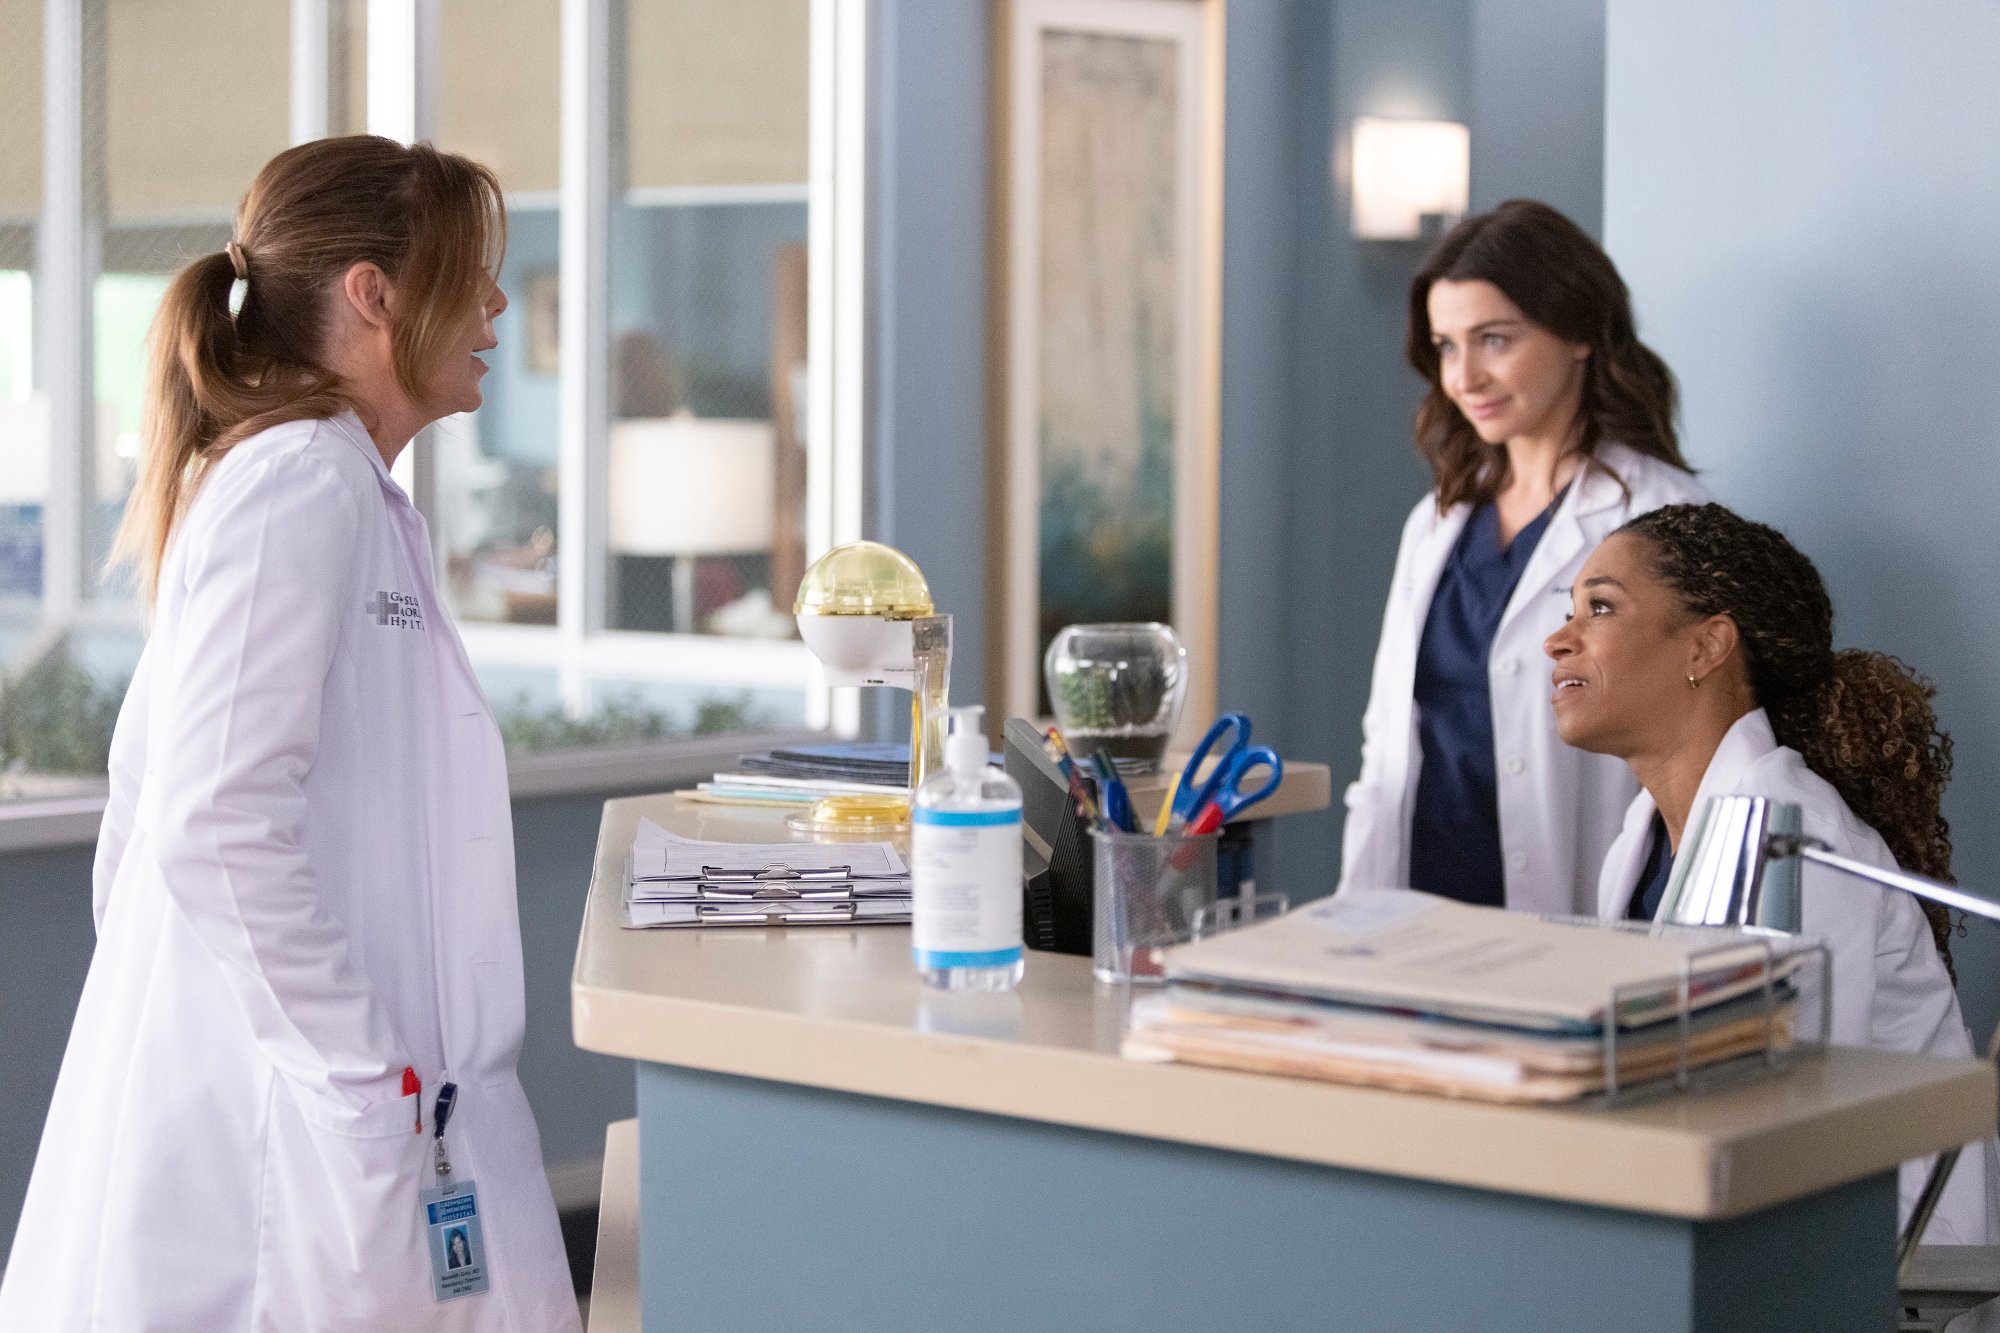 The doctors at Grey Sloan Memorial Hospital, who could be impacted by the choices teased in the preview for the 'Grey's Anatomy' Season 18 finale. They're standing around a desk wearing white lab coats.